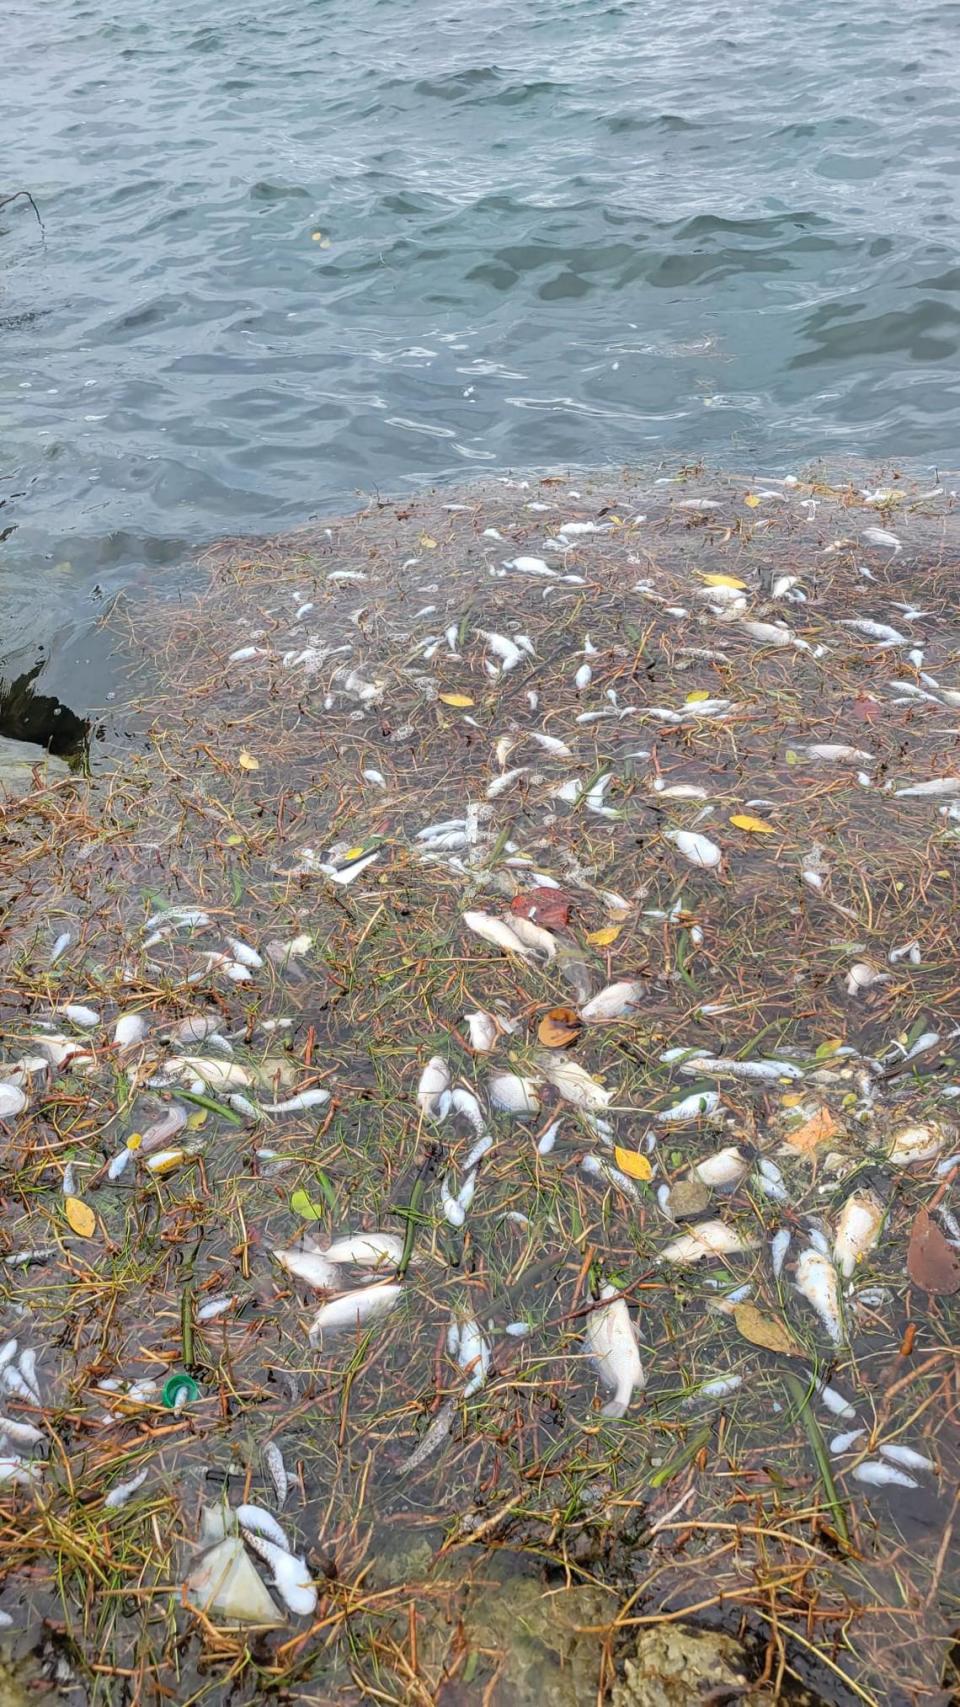 Residents started reporting clumps of dead fish to Miami Waterkeeper Wednesday morning, and officials quickly confirmed it was another major fish kill for Biscayne Bay.